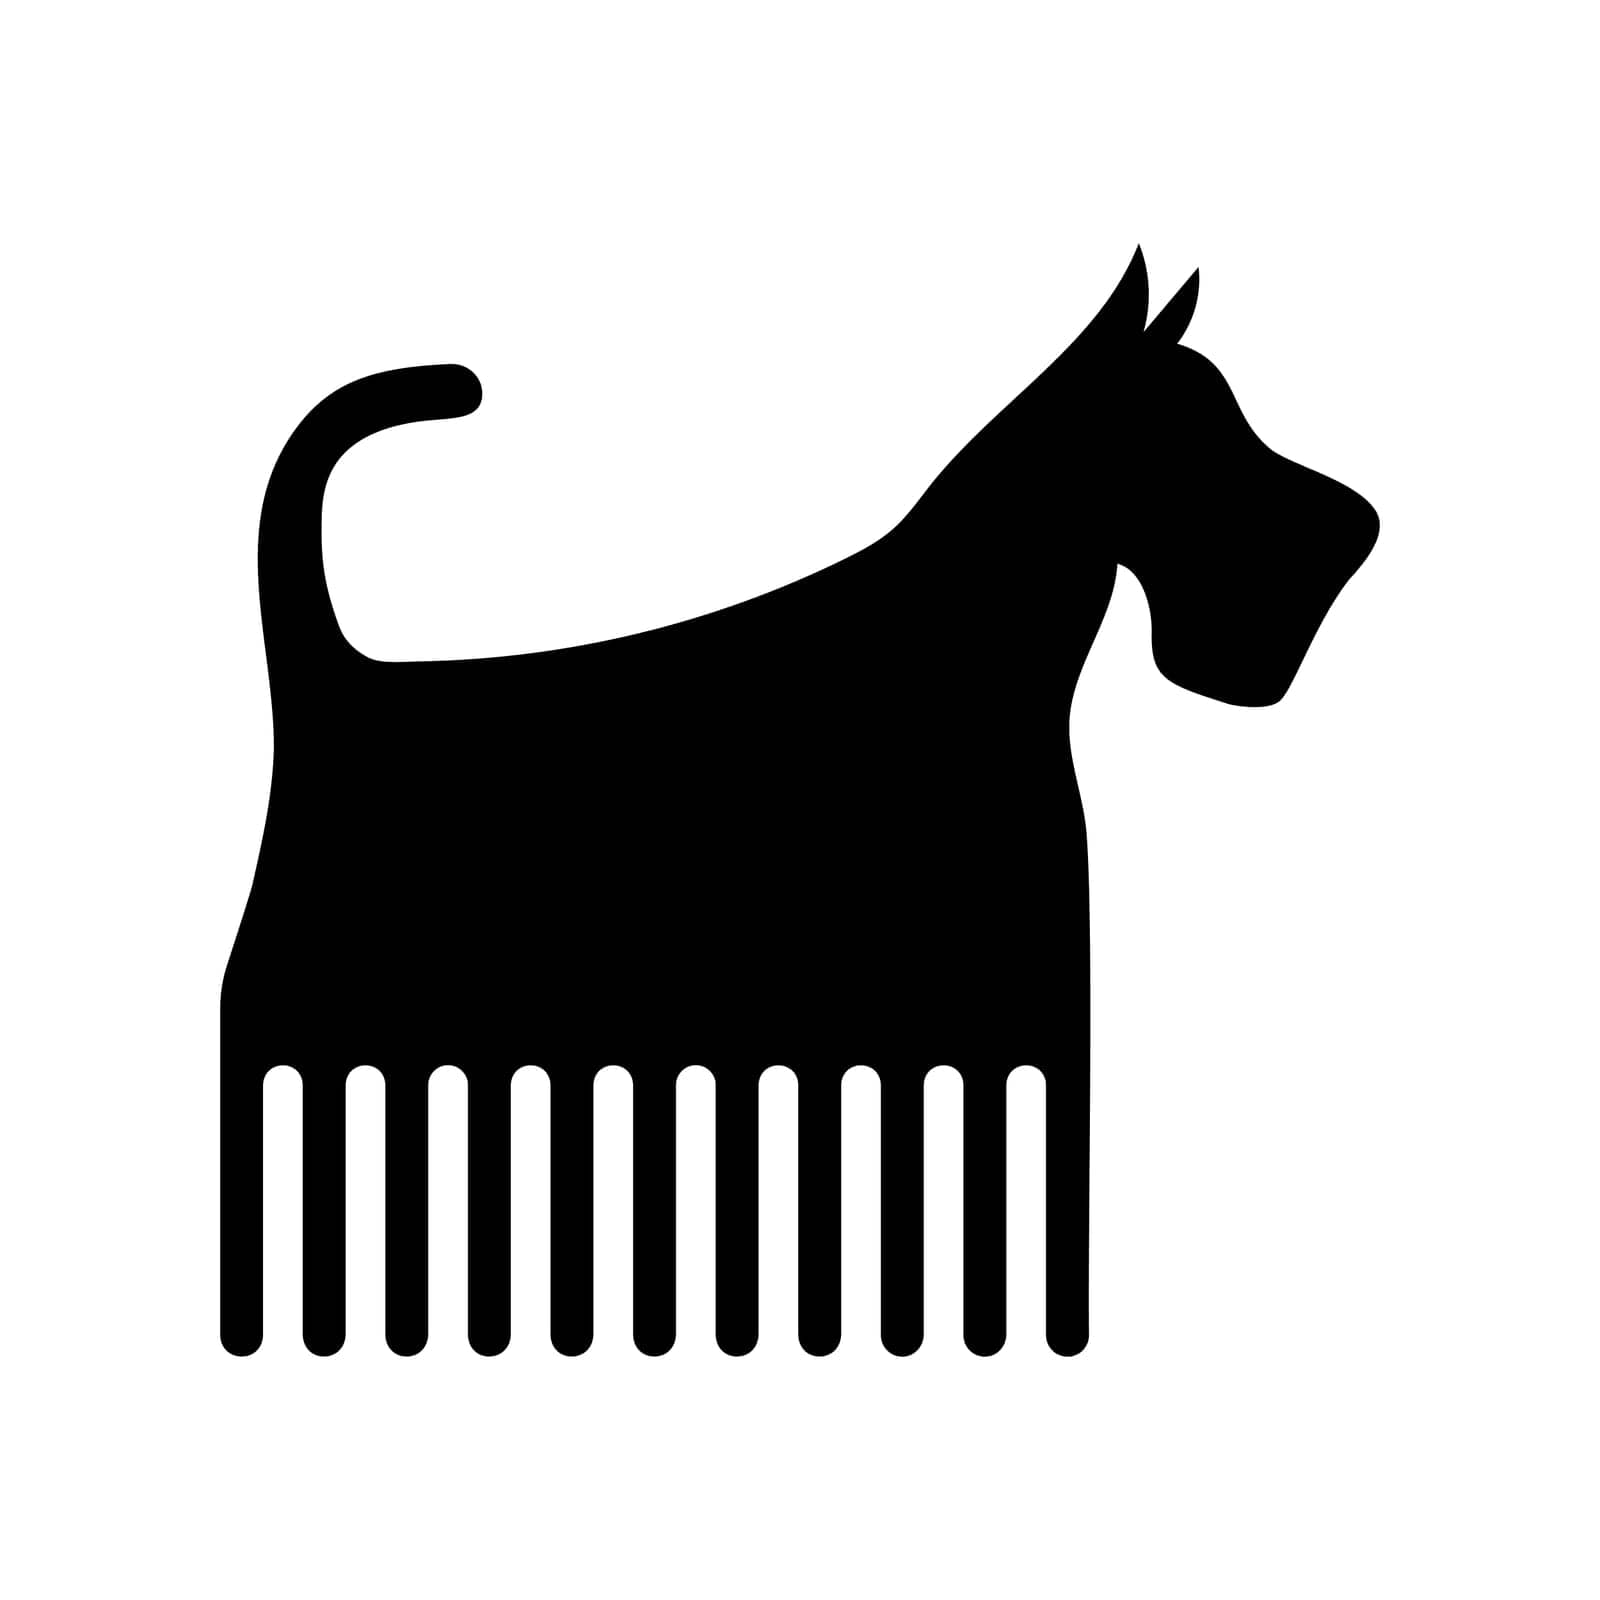 Dog groomer icon. Puppy silhouette united with comb. Pet hairdresser salon symbol. Vector illustration by Ablohina